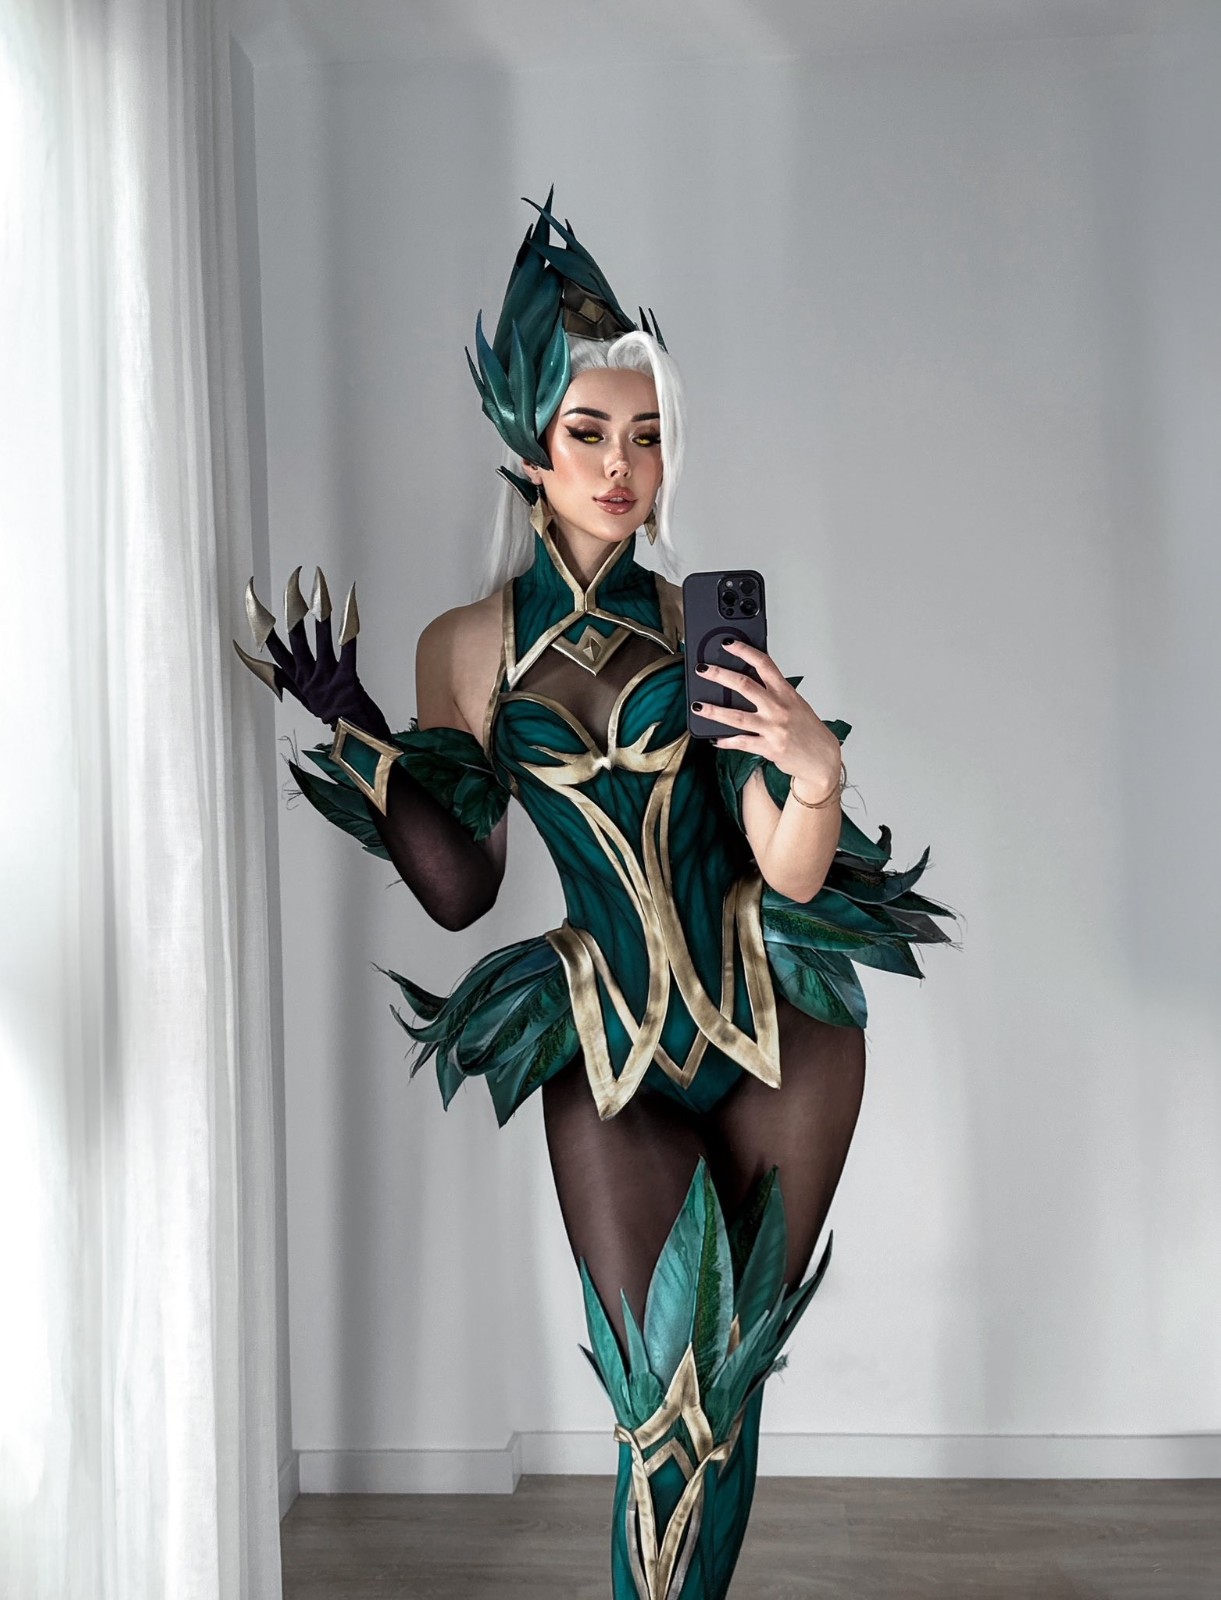  Star Blade: Costume with skin and clothes, hot figure, comparable to Eve